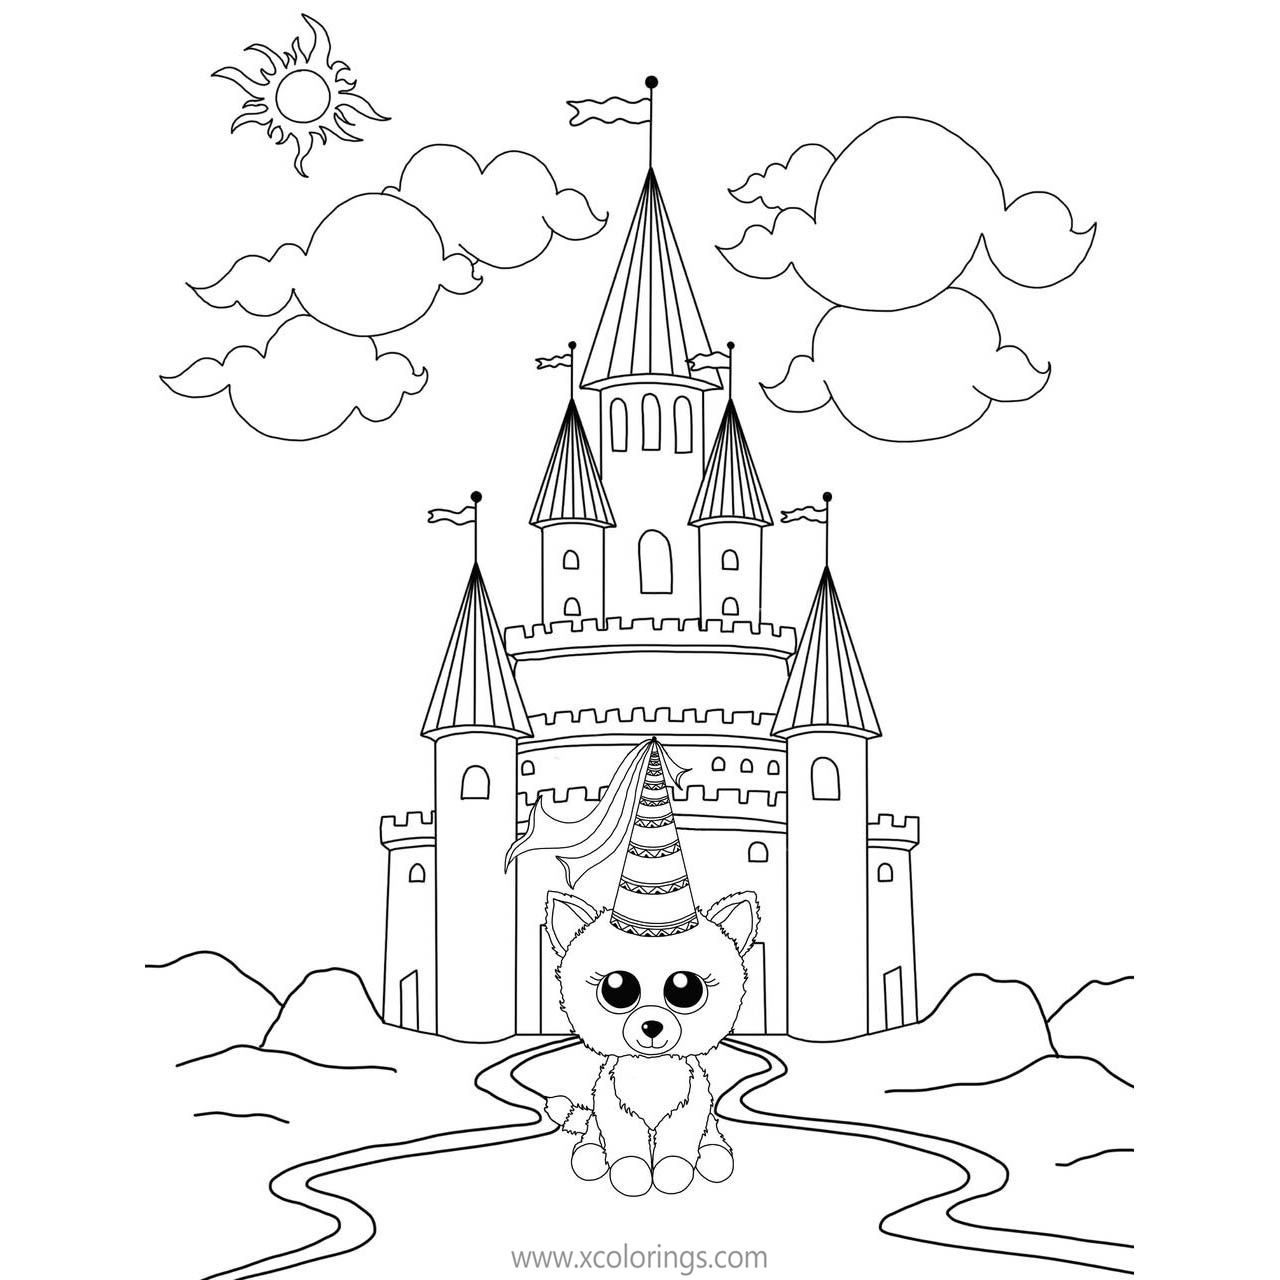 Free Beanie Boos Coloring Pages Castle printable